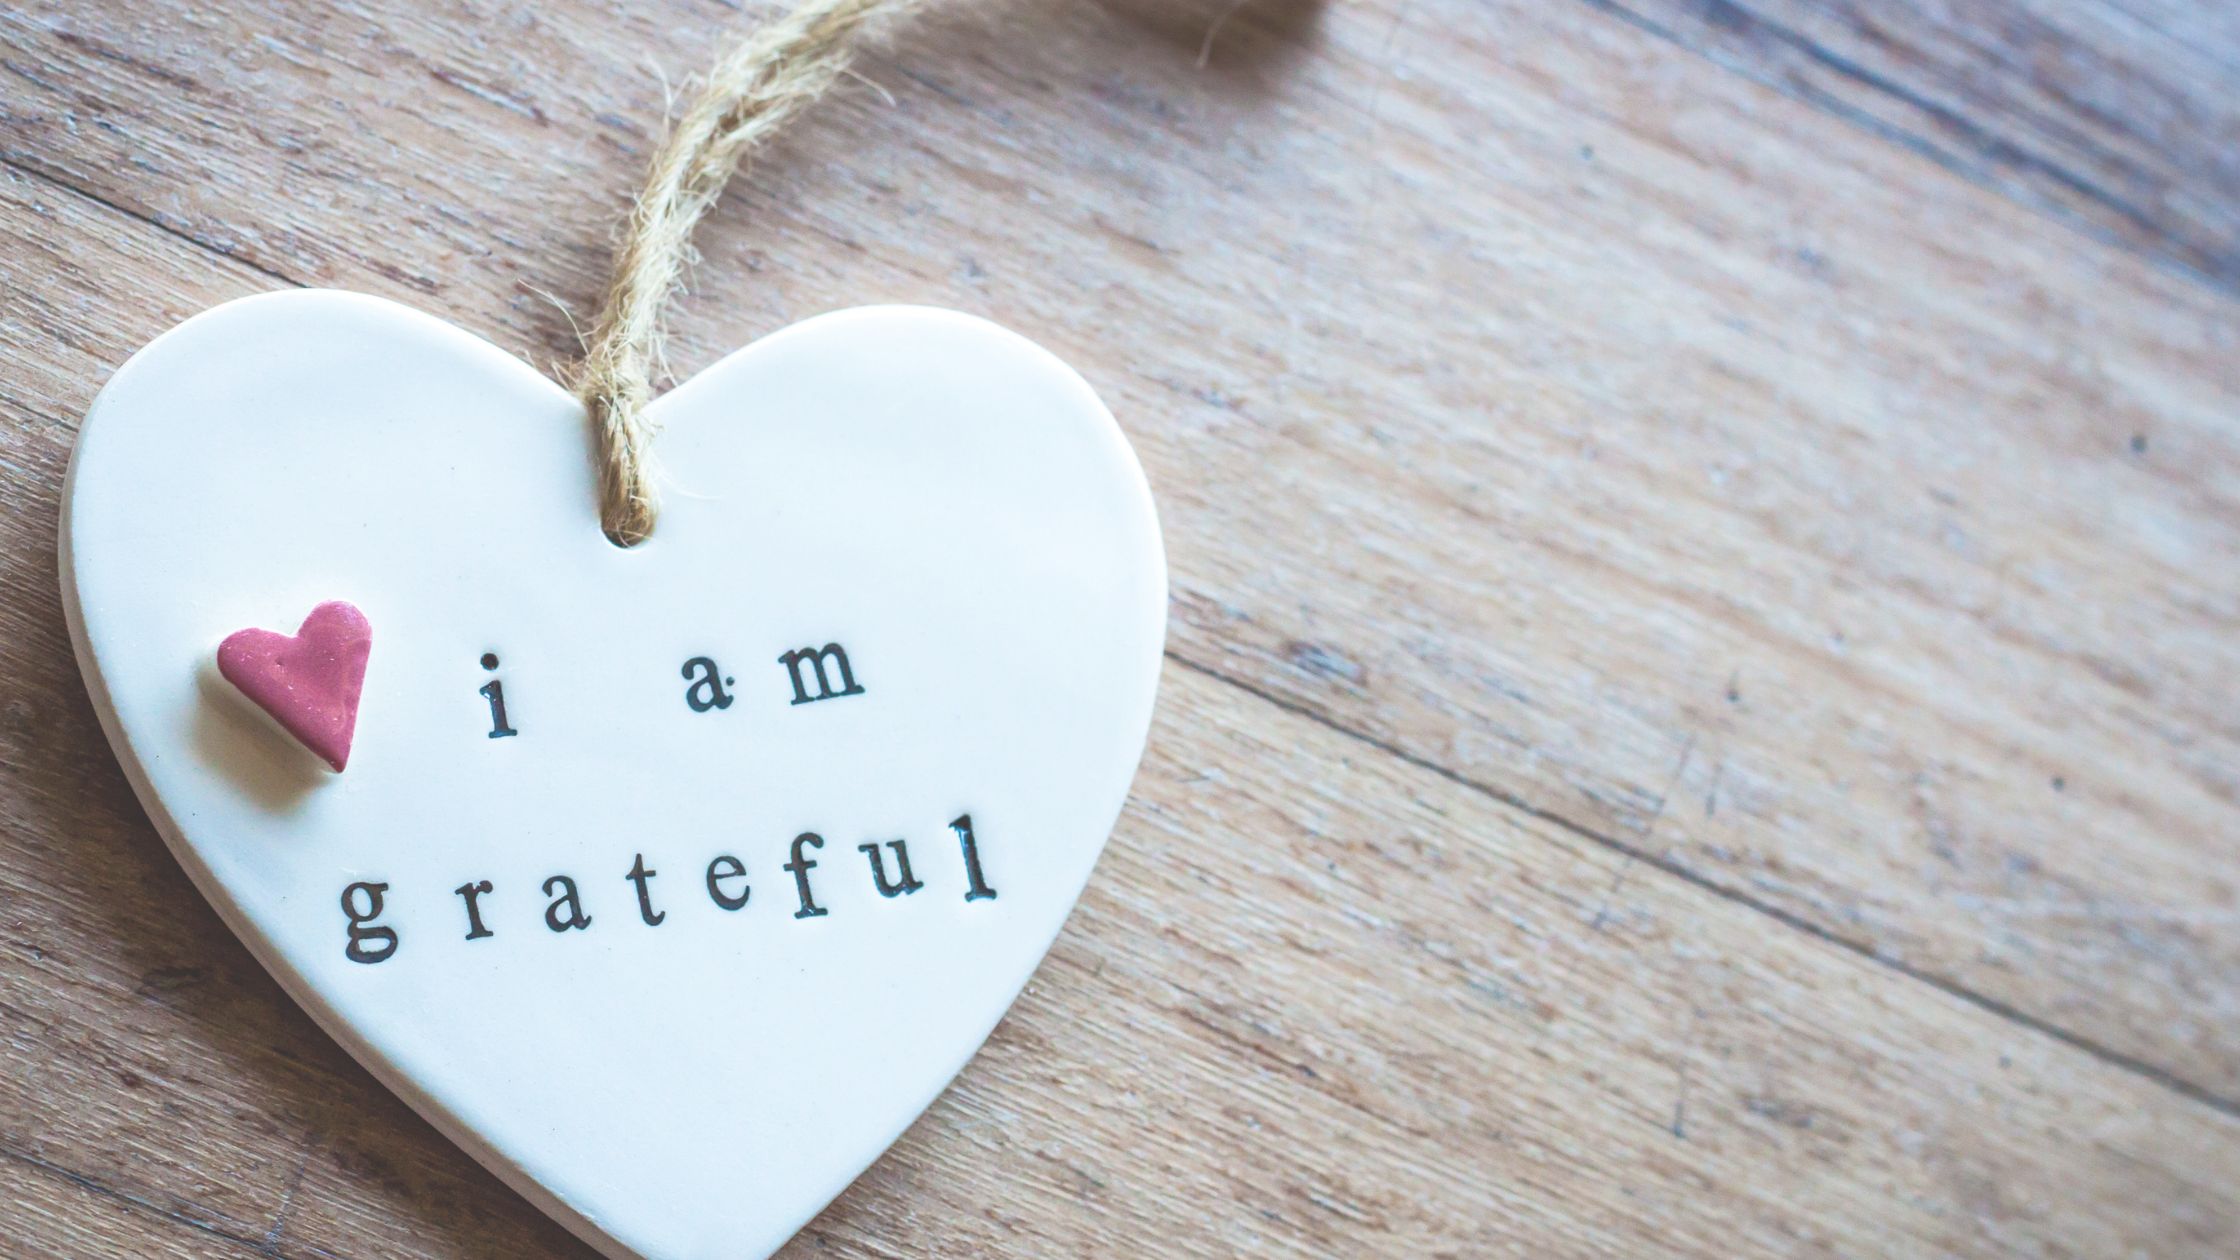 an ornament to encourage being grateful and having attitude of gratitude